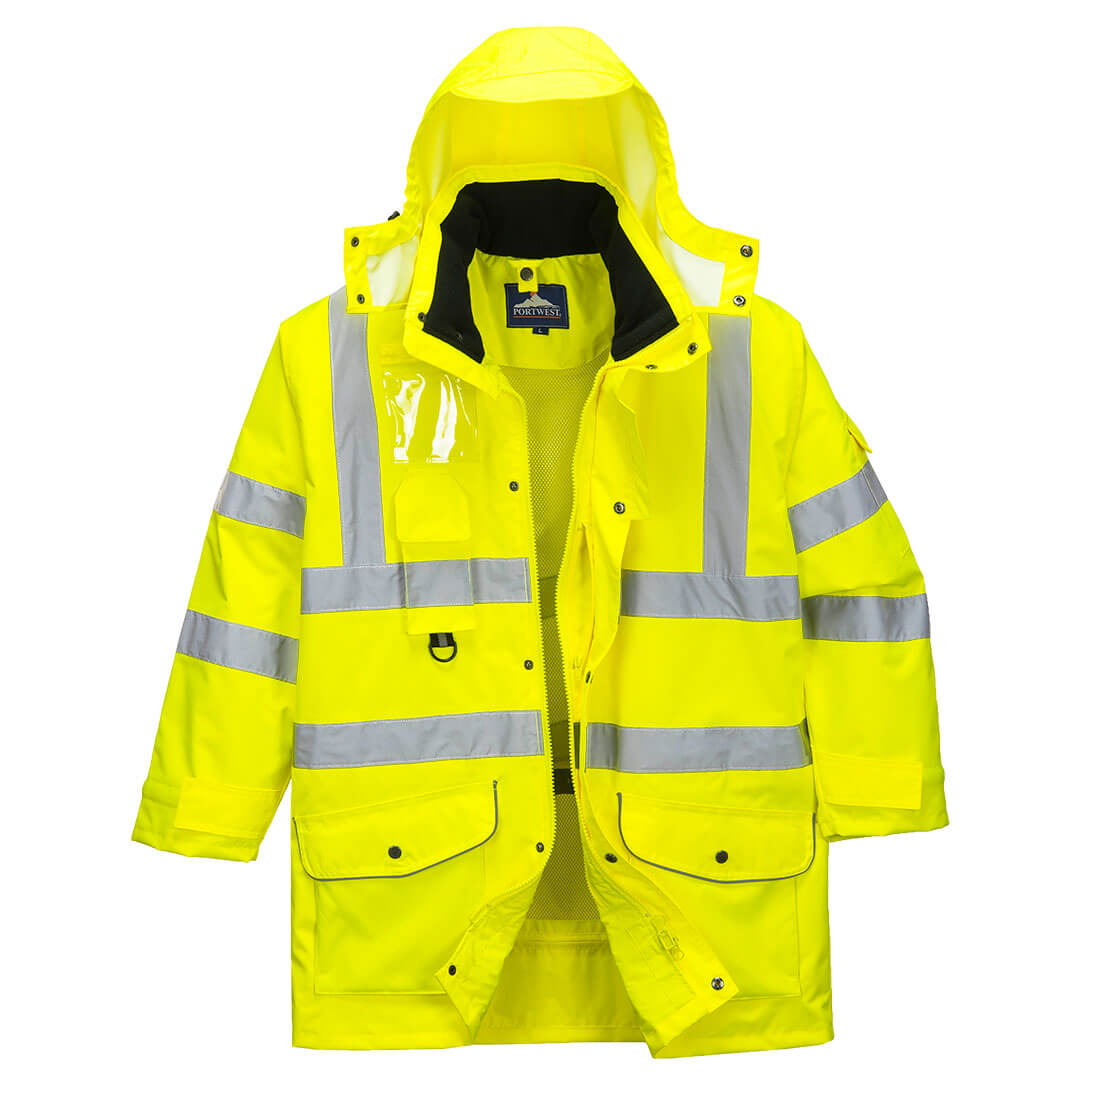 Image of Oxford Weave 300D Class 3 Hi Vis 7-in-1 Traffic Jacket Yellow XS